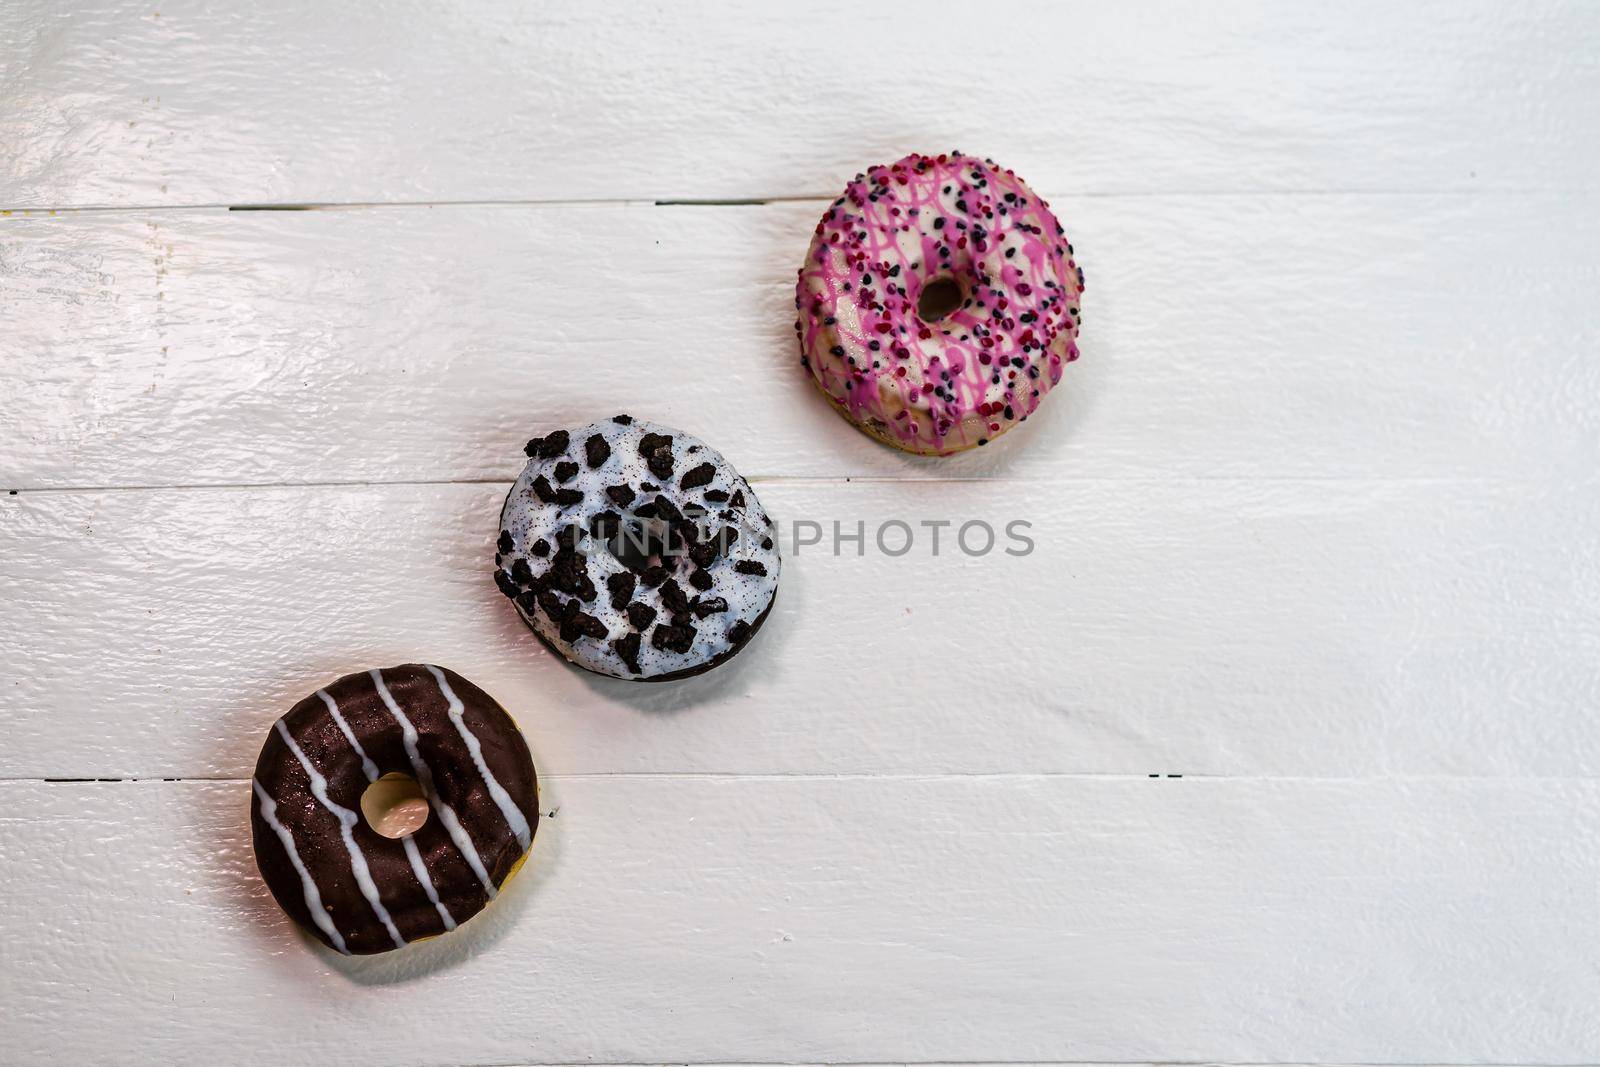 Colorful donuts on white wooden table. Sweet icing sugar food with glazed sprinkles, doughnut with frosting. Top view with copy space